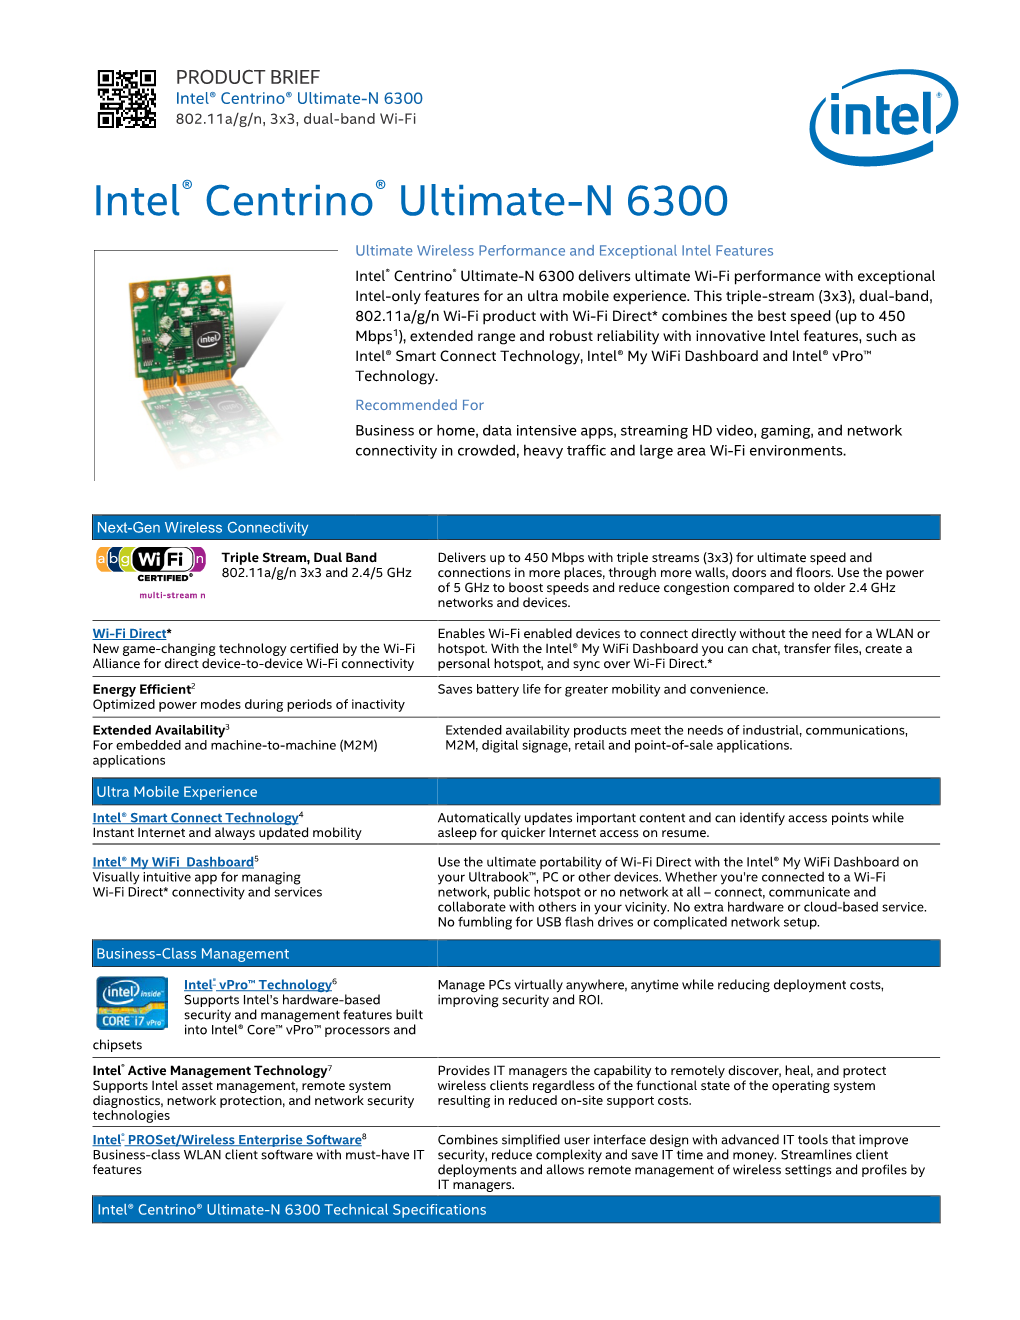 Intel® Centrino® Ultimate-N 6300: Product Brief